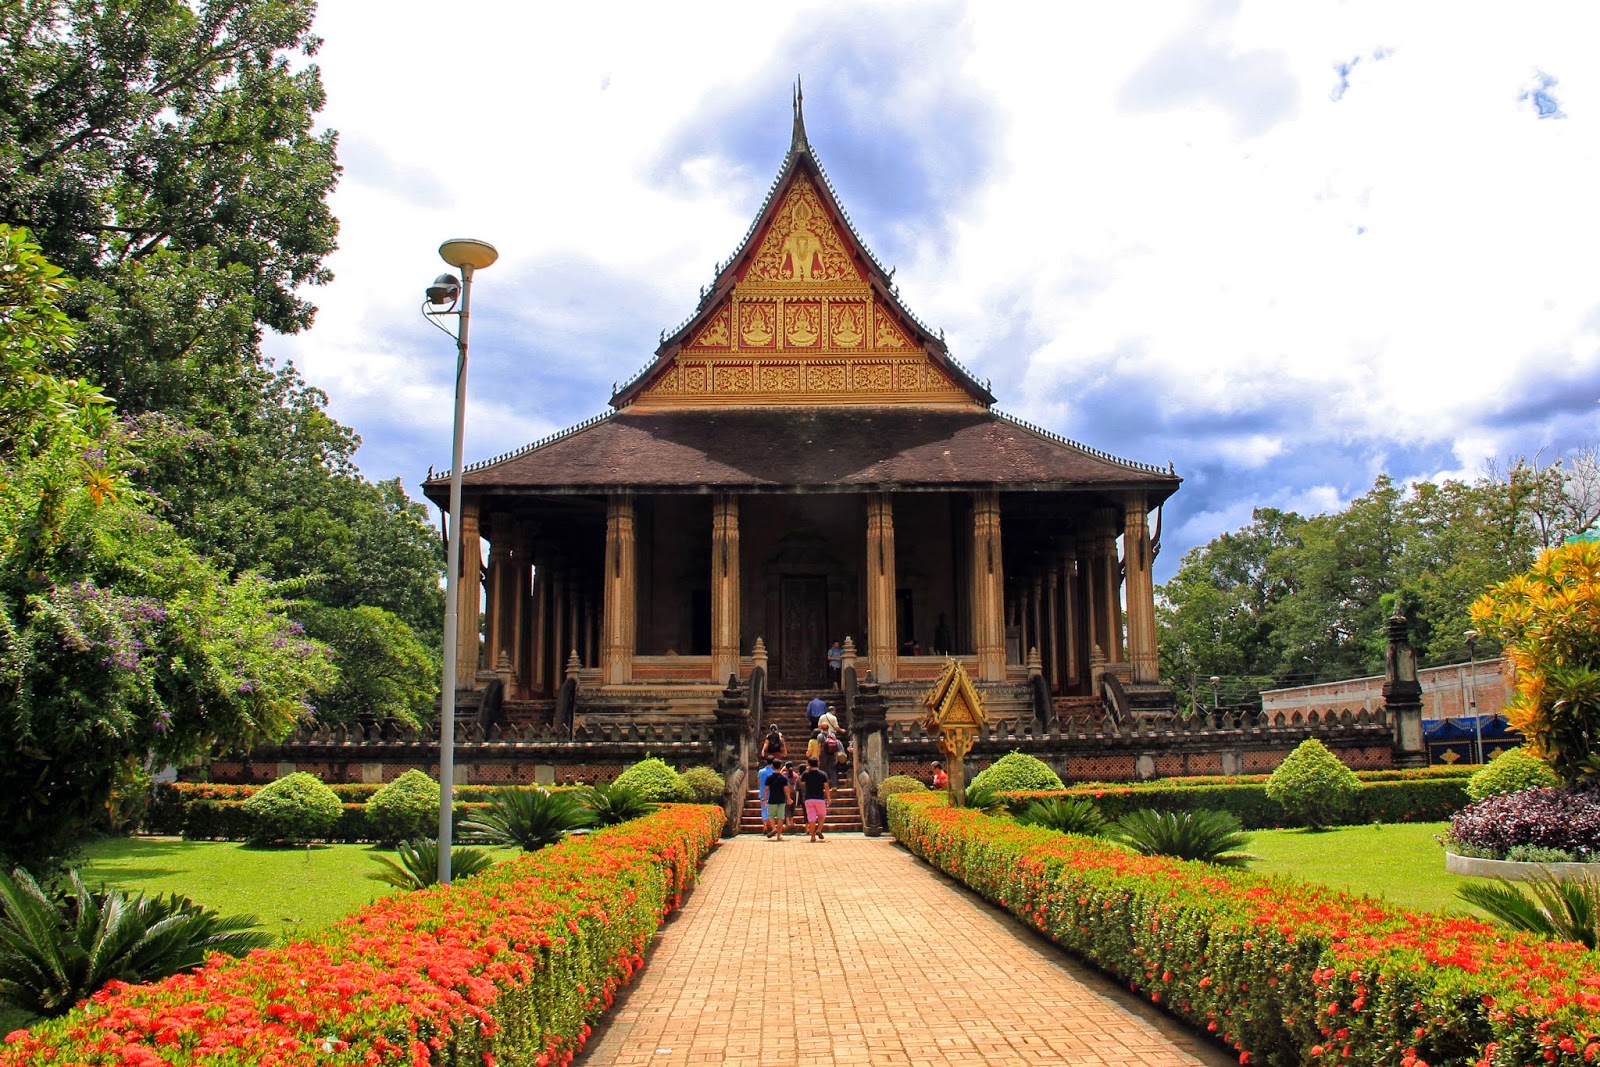 ho phra keo vientiane - Tours by group